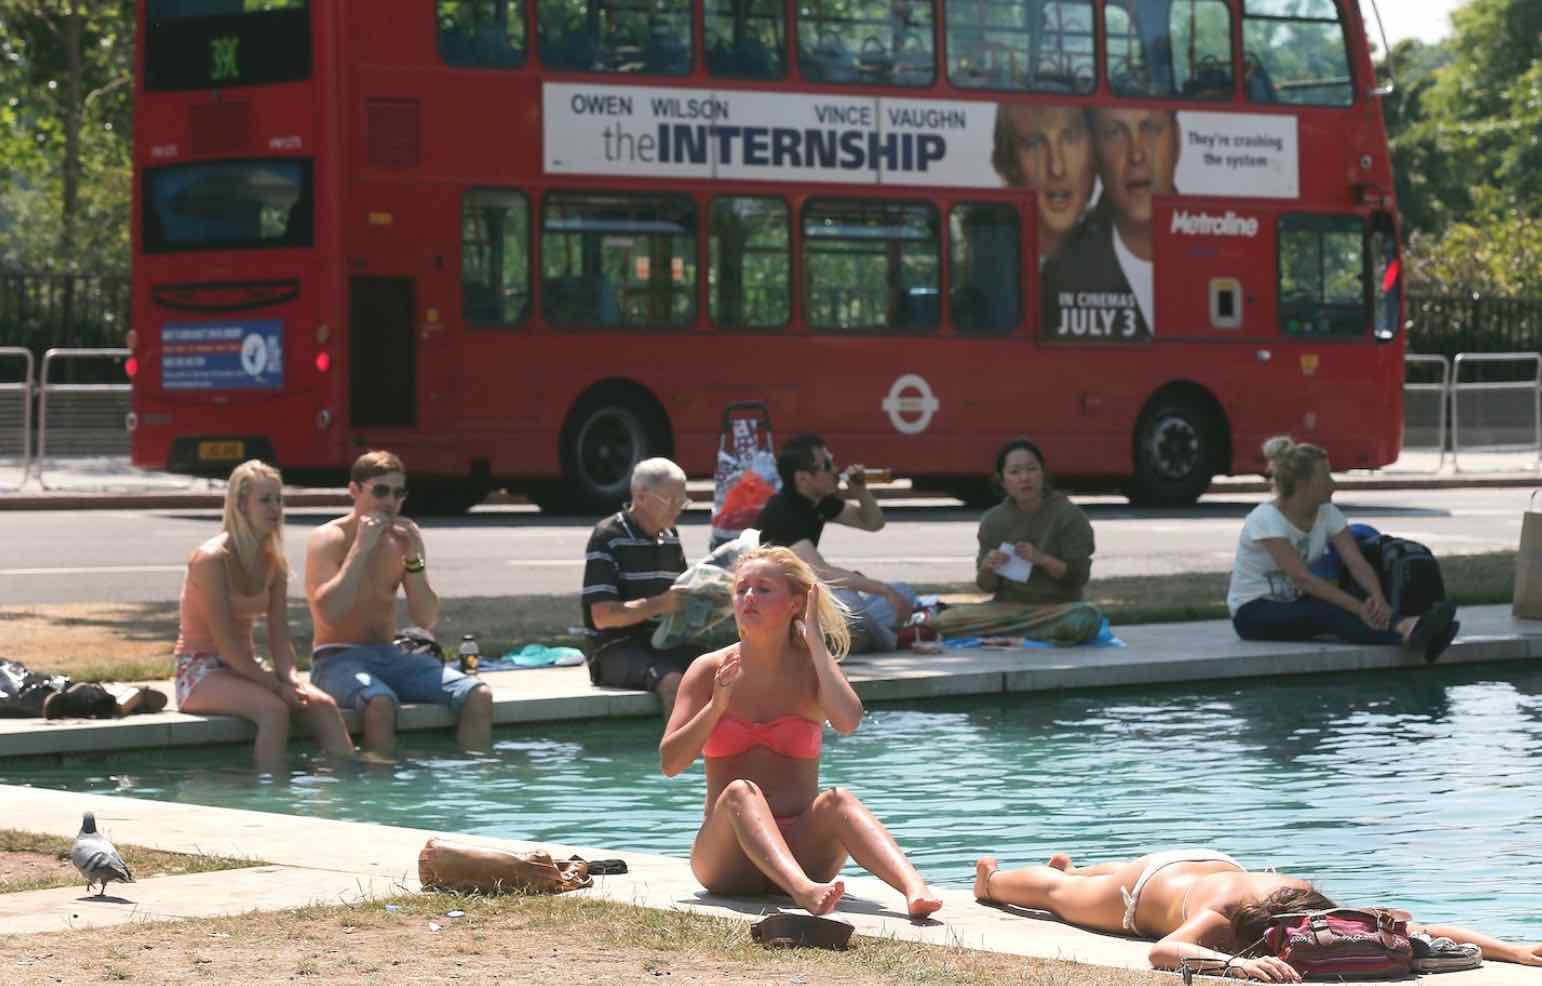 UK April Heatwave: England set for hottest day of the year so far